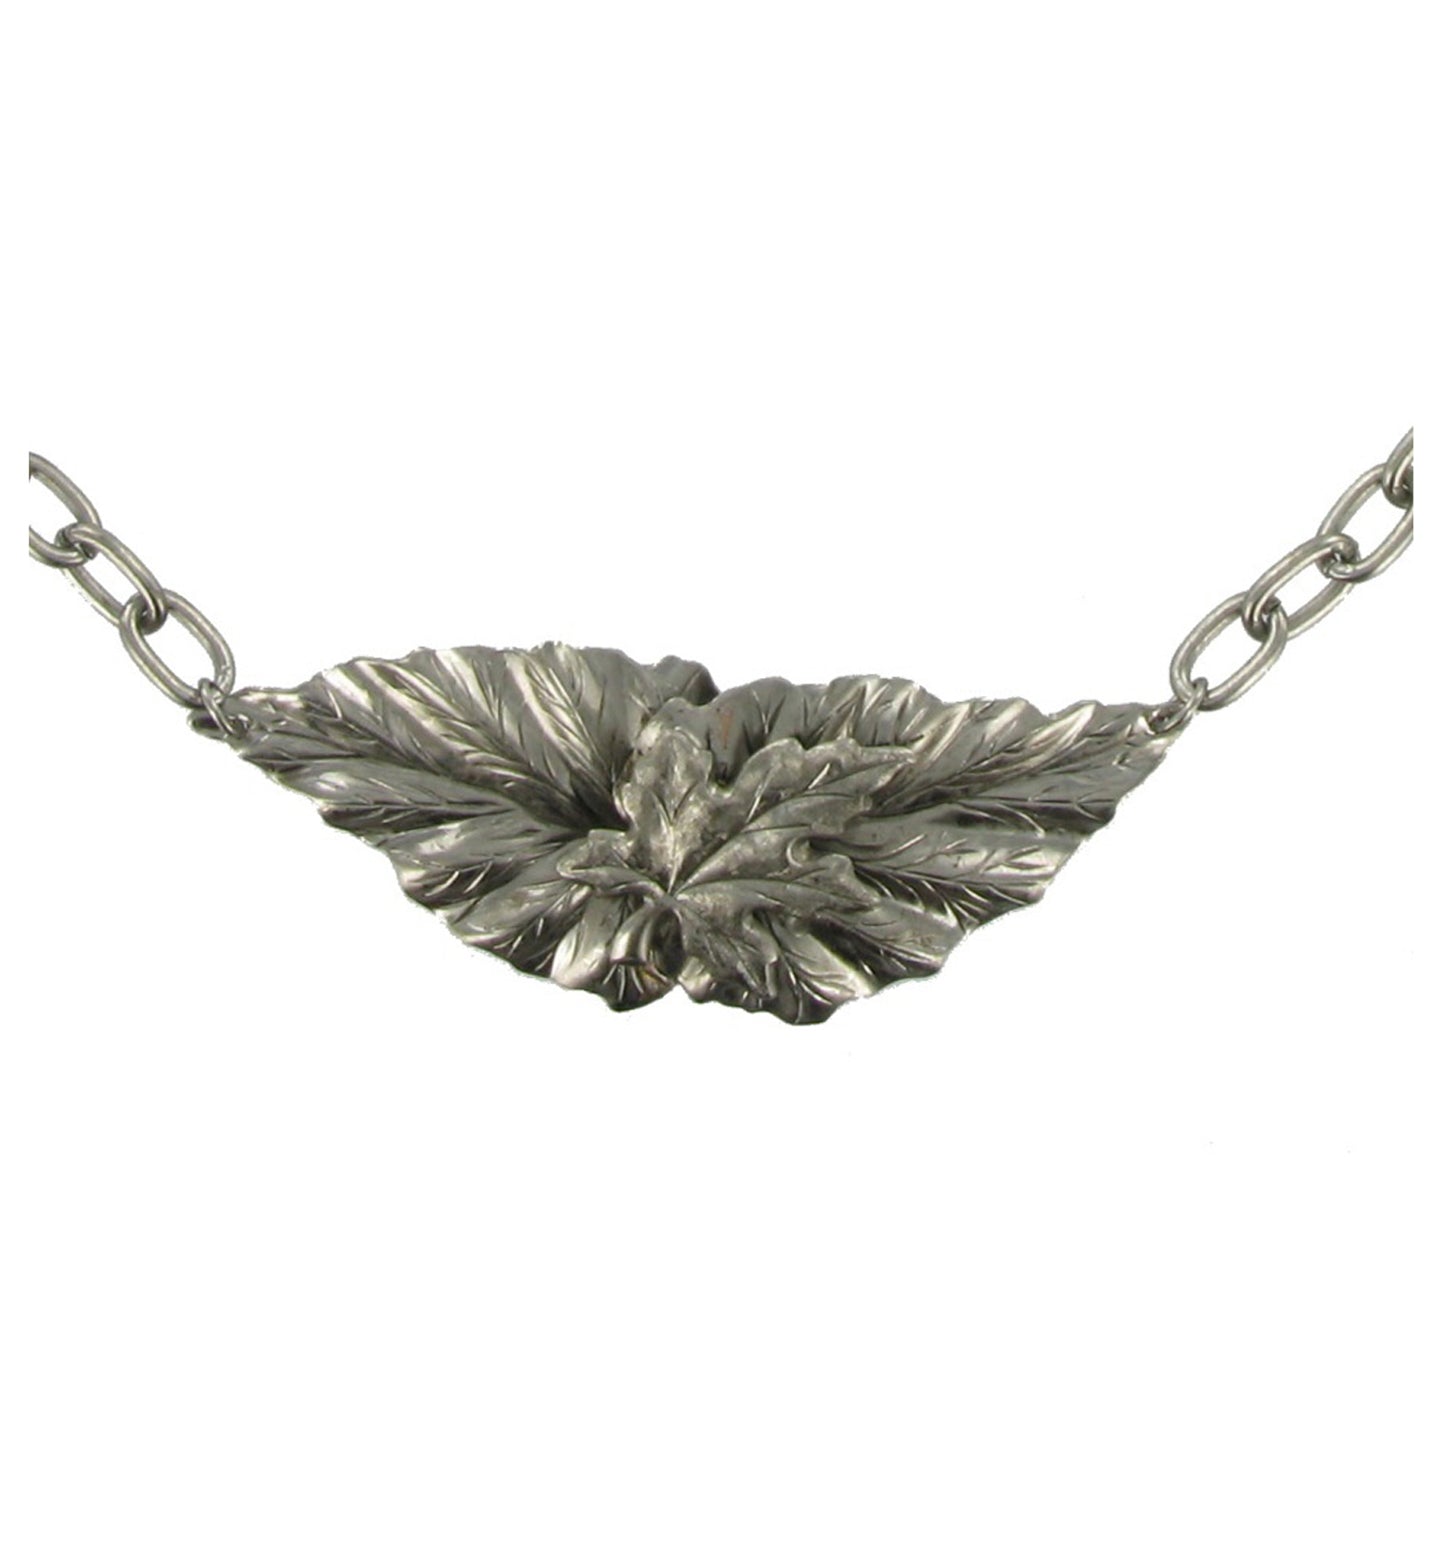 Large Silver Tone Leaf Pendant Chunky Cable Chain Link Necklace For Women 19.5"